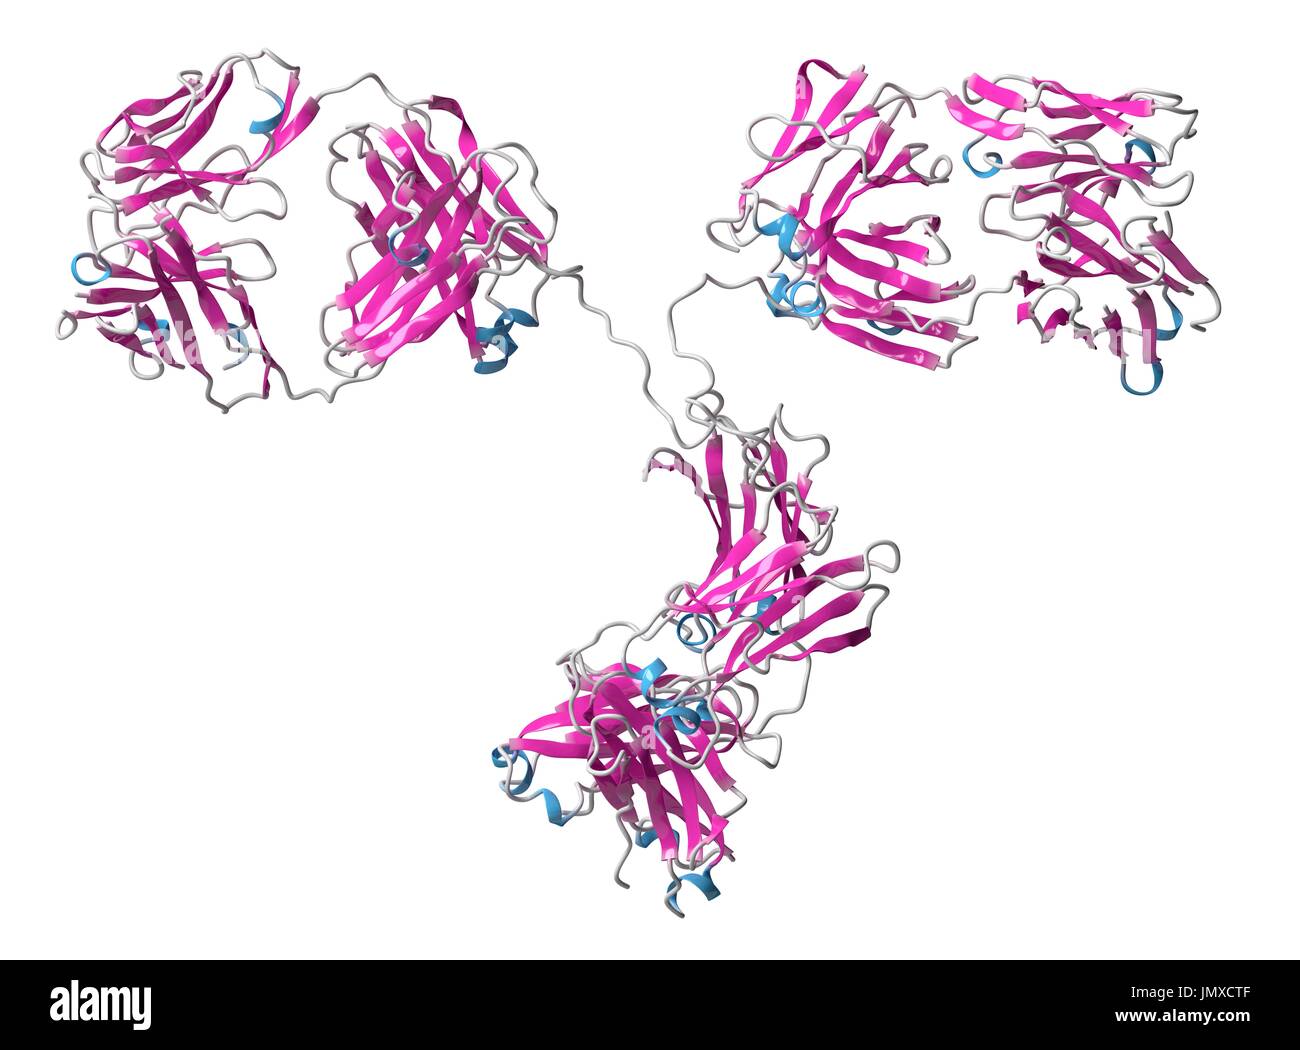 IgG2a monoclonal antibody (immunoglobulin). Many biotech drugs are antibodies. Cartoon model, secondary structure colouring (helices blue, sheets pink). Stock Photo